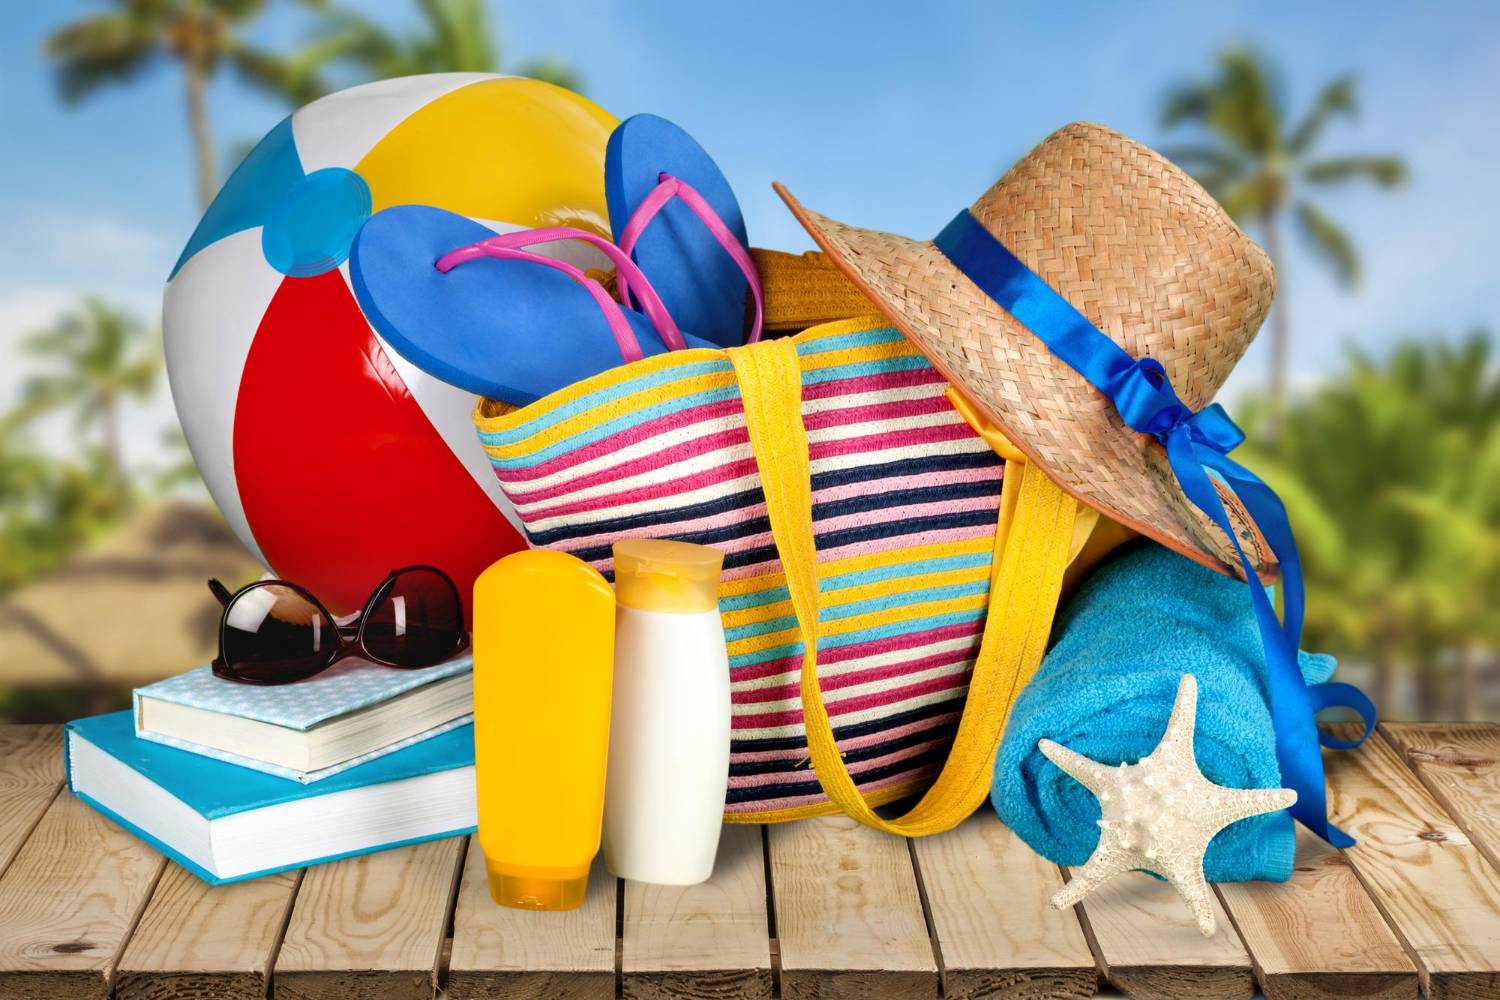 Colorful beach essentials, including a striped bag, sunscreen, hat, and flip-flops, on a wooden table. Be your own captain and prepare for a perfect beach day.